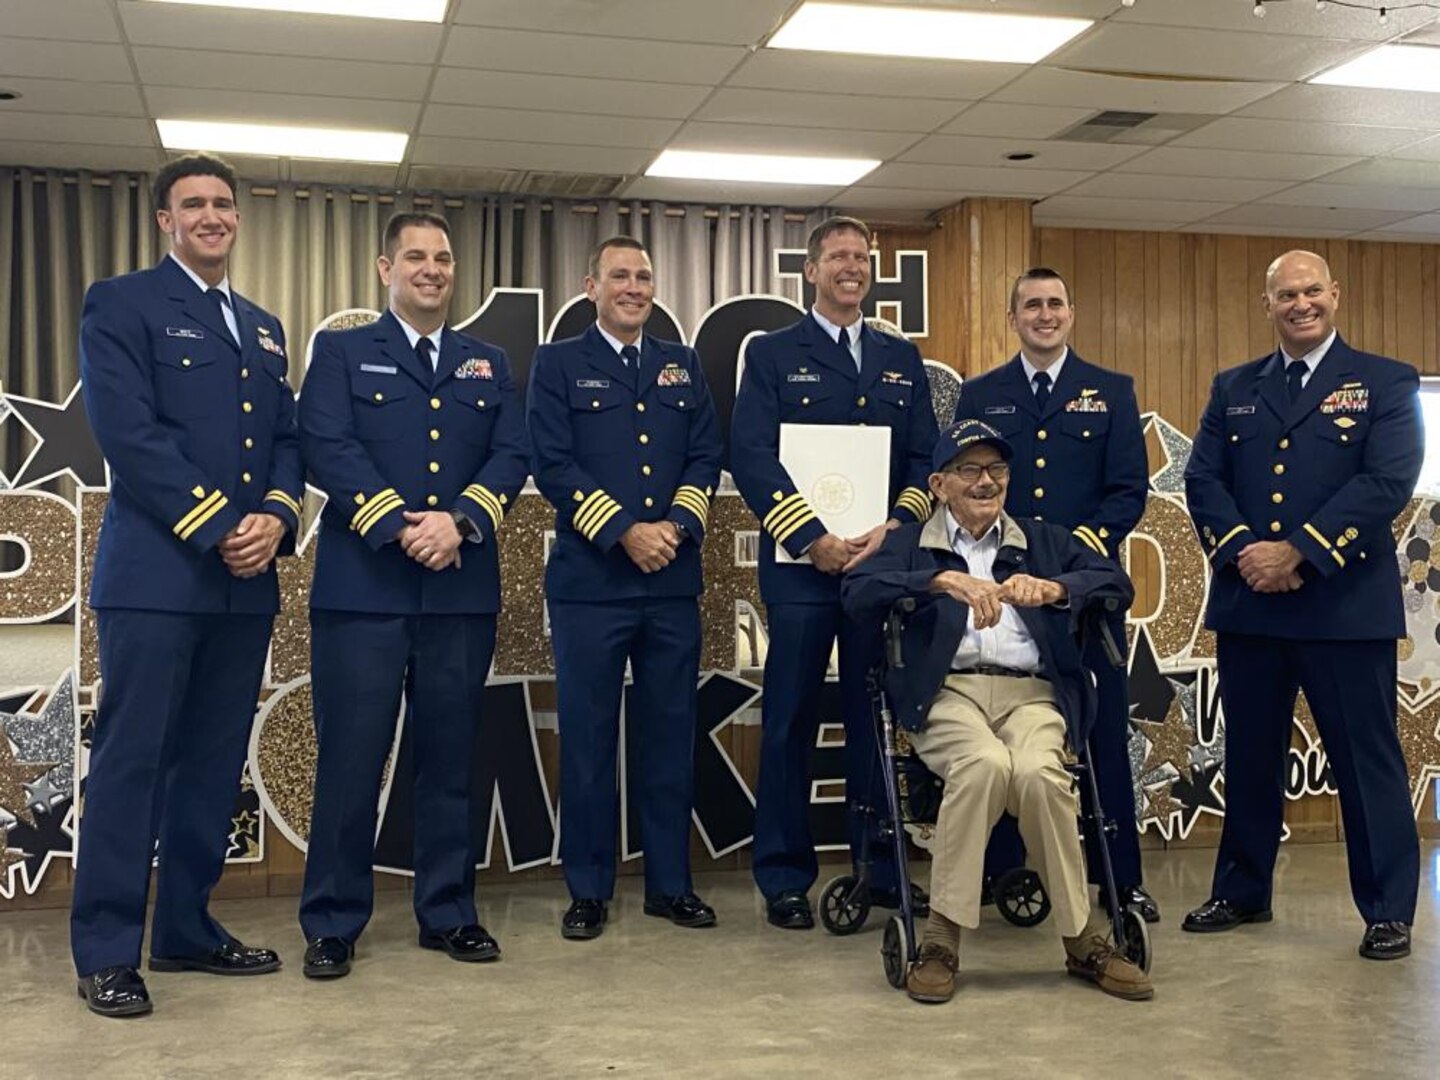 Members from Coast Guard Sector/Air Station Corpus Christi attend a birthday celebration for Michael J. Swierc, Coast Guard veteran who turned 100 years old, Nov. 6, 2021, in Falls City, Texas. Swierc was presented with a hand written letter from the Commandant, as well as a Coast Guard ensign signed by members of Sector/Air Station Corpus Christi and a unit ball cover. (U.S. Coast Guard photo, courtesy Sector/Air Station Corpus Christi)